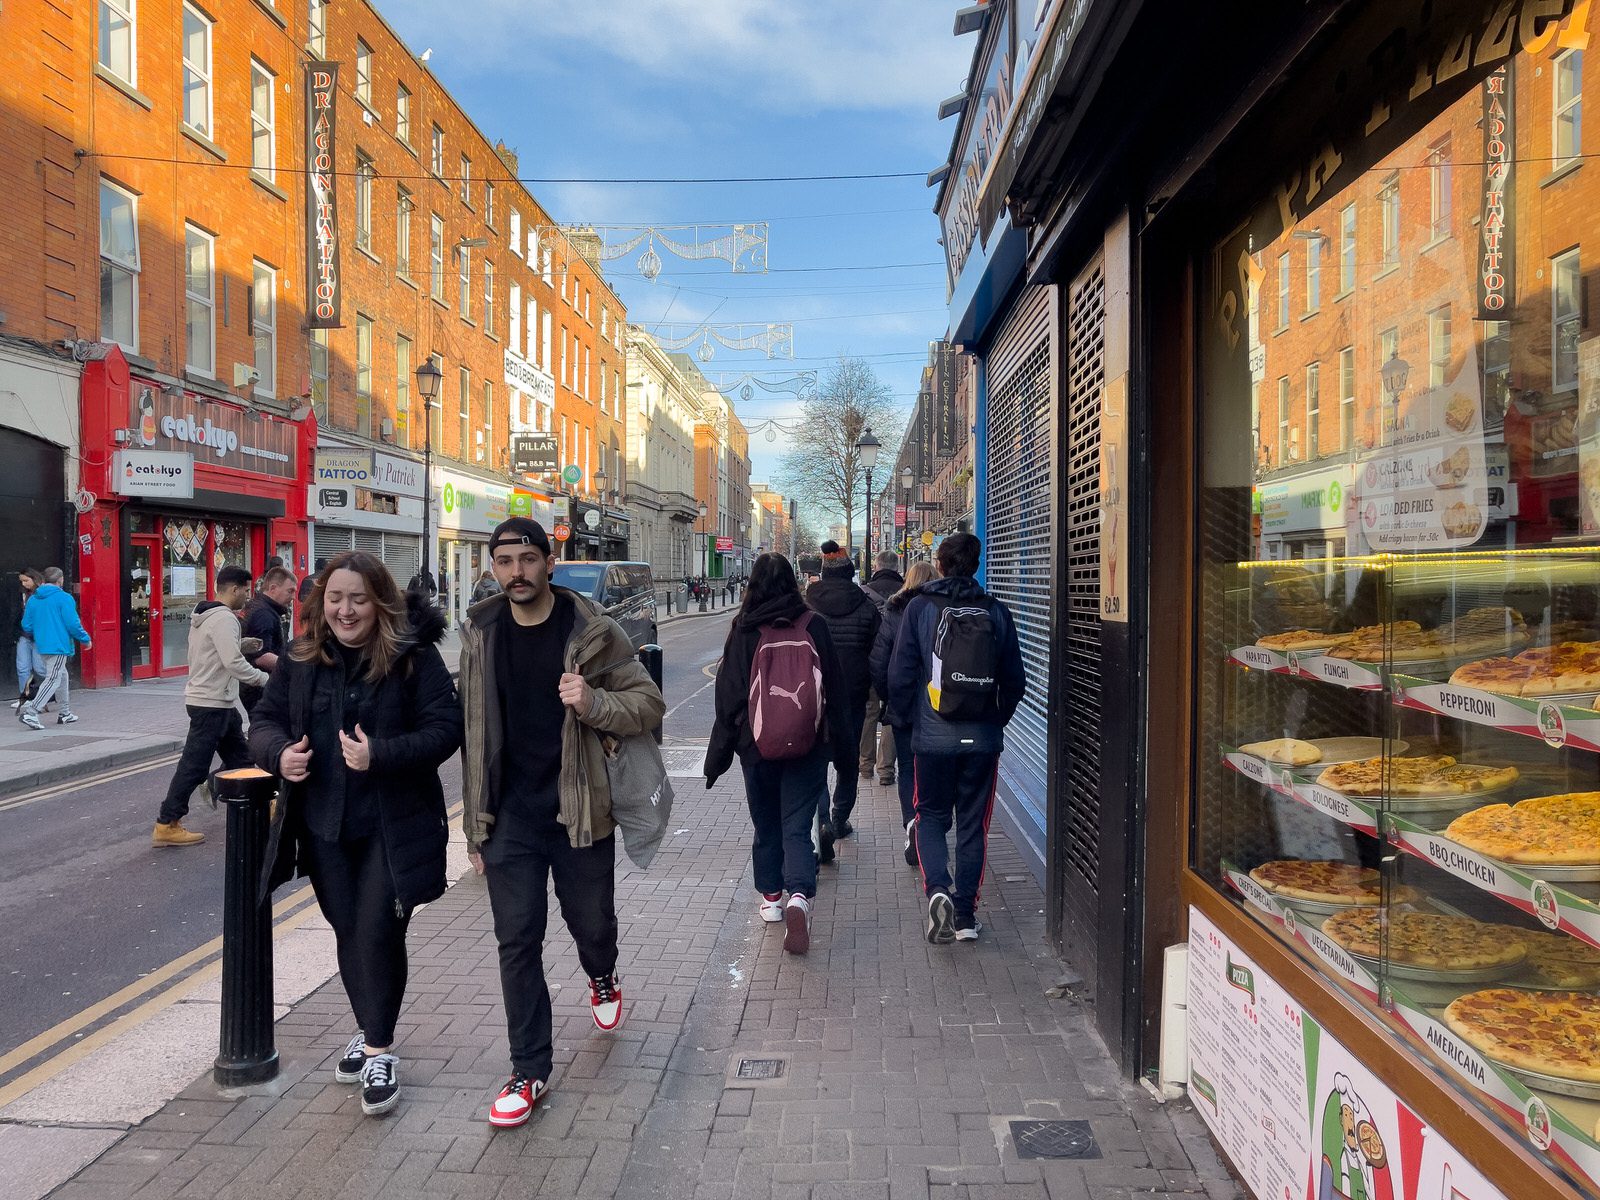 TALBOT STREET [FAILS TO MEET ITS POTENTIAL AS A MAJOR SHOPPING STREET]-225717-1